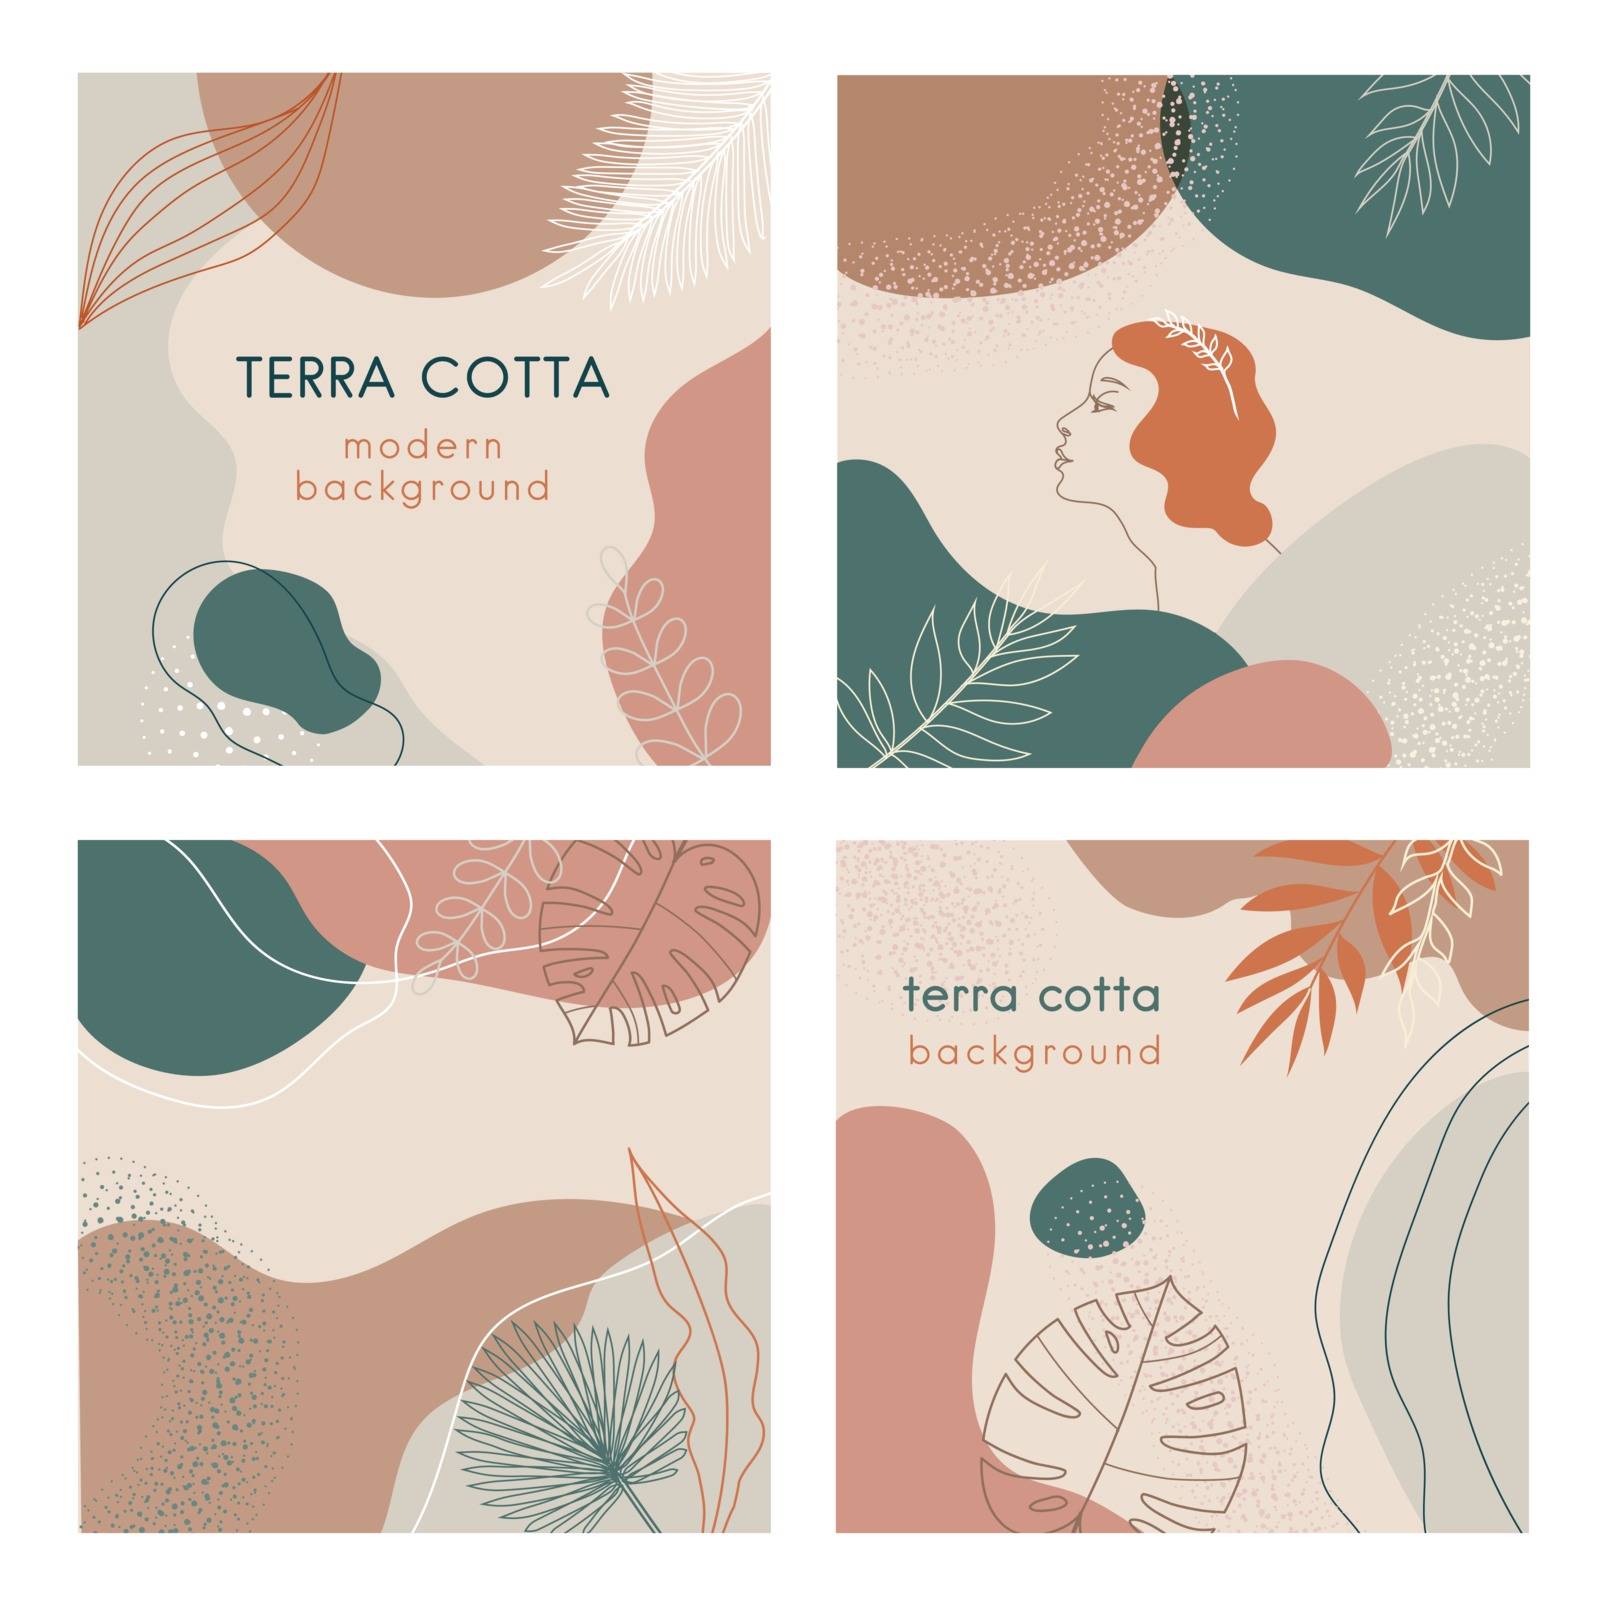 Social media banners set of abstract modern backgrounds with terra cotta pastel color combinations, shapes and tropical palm , monstera leaves, one line women face logo icon. For advertising, branding